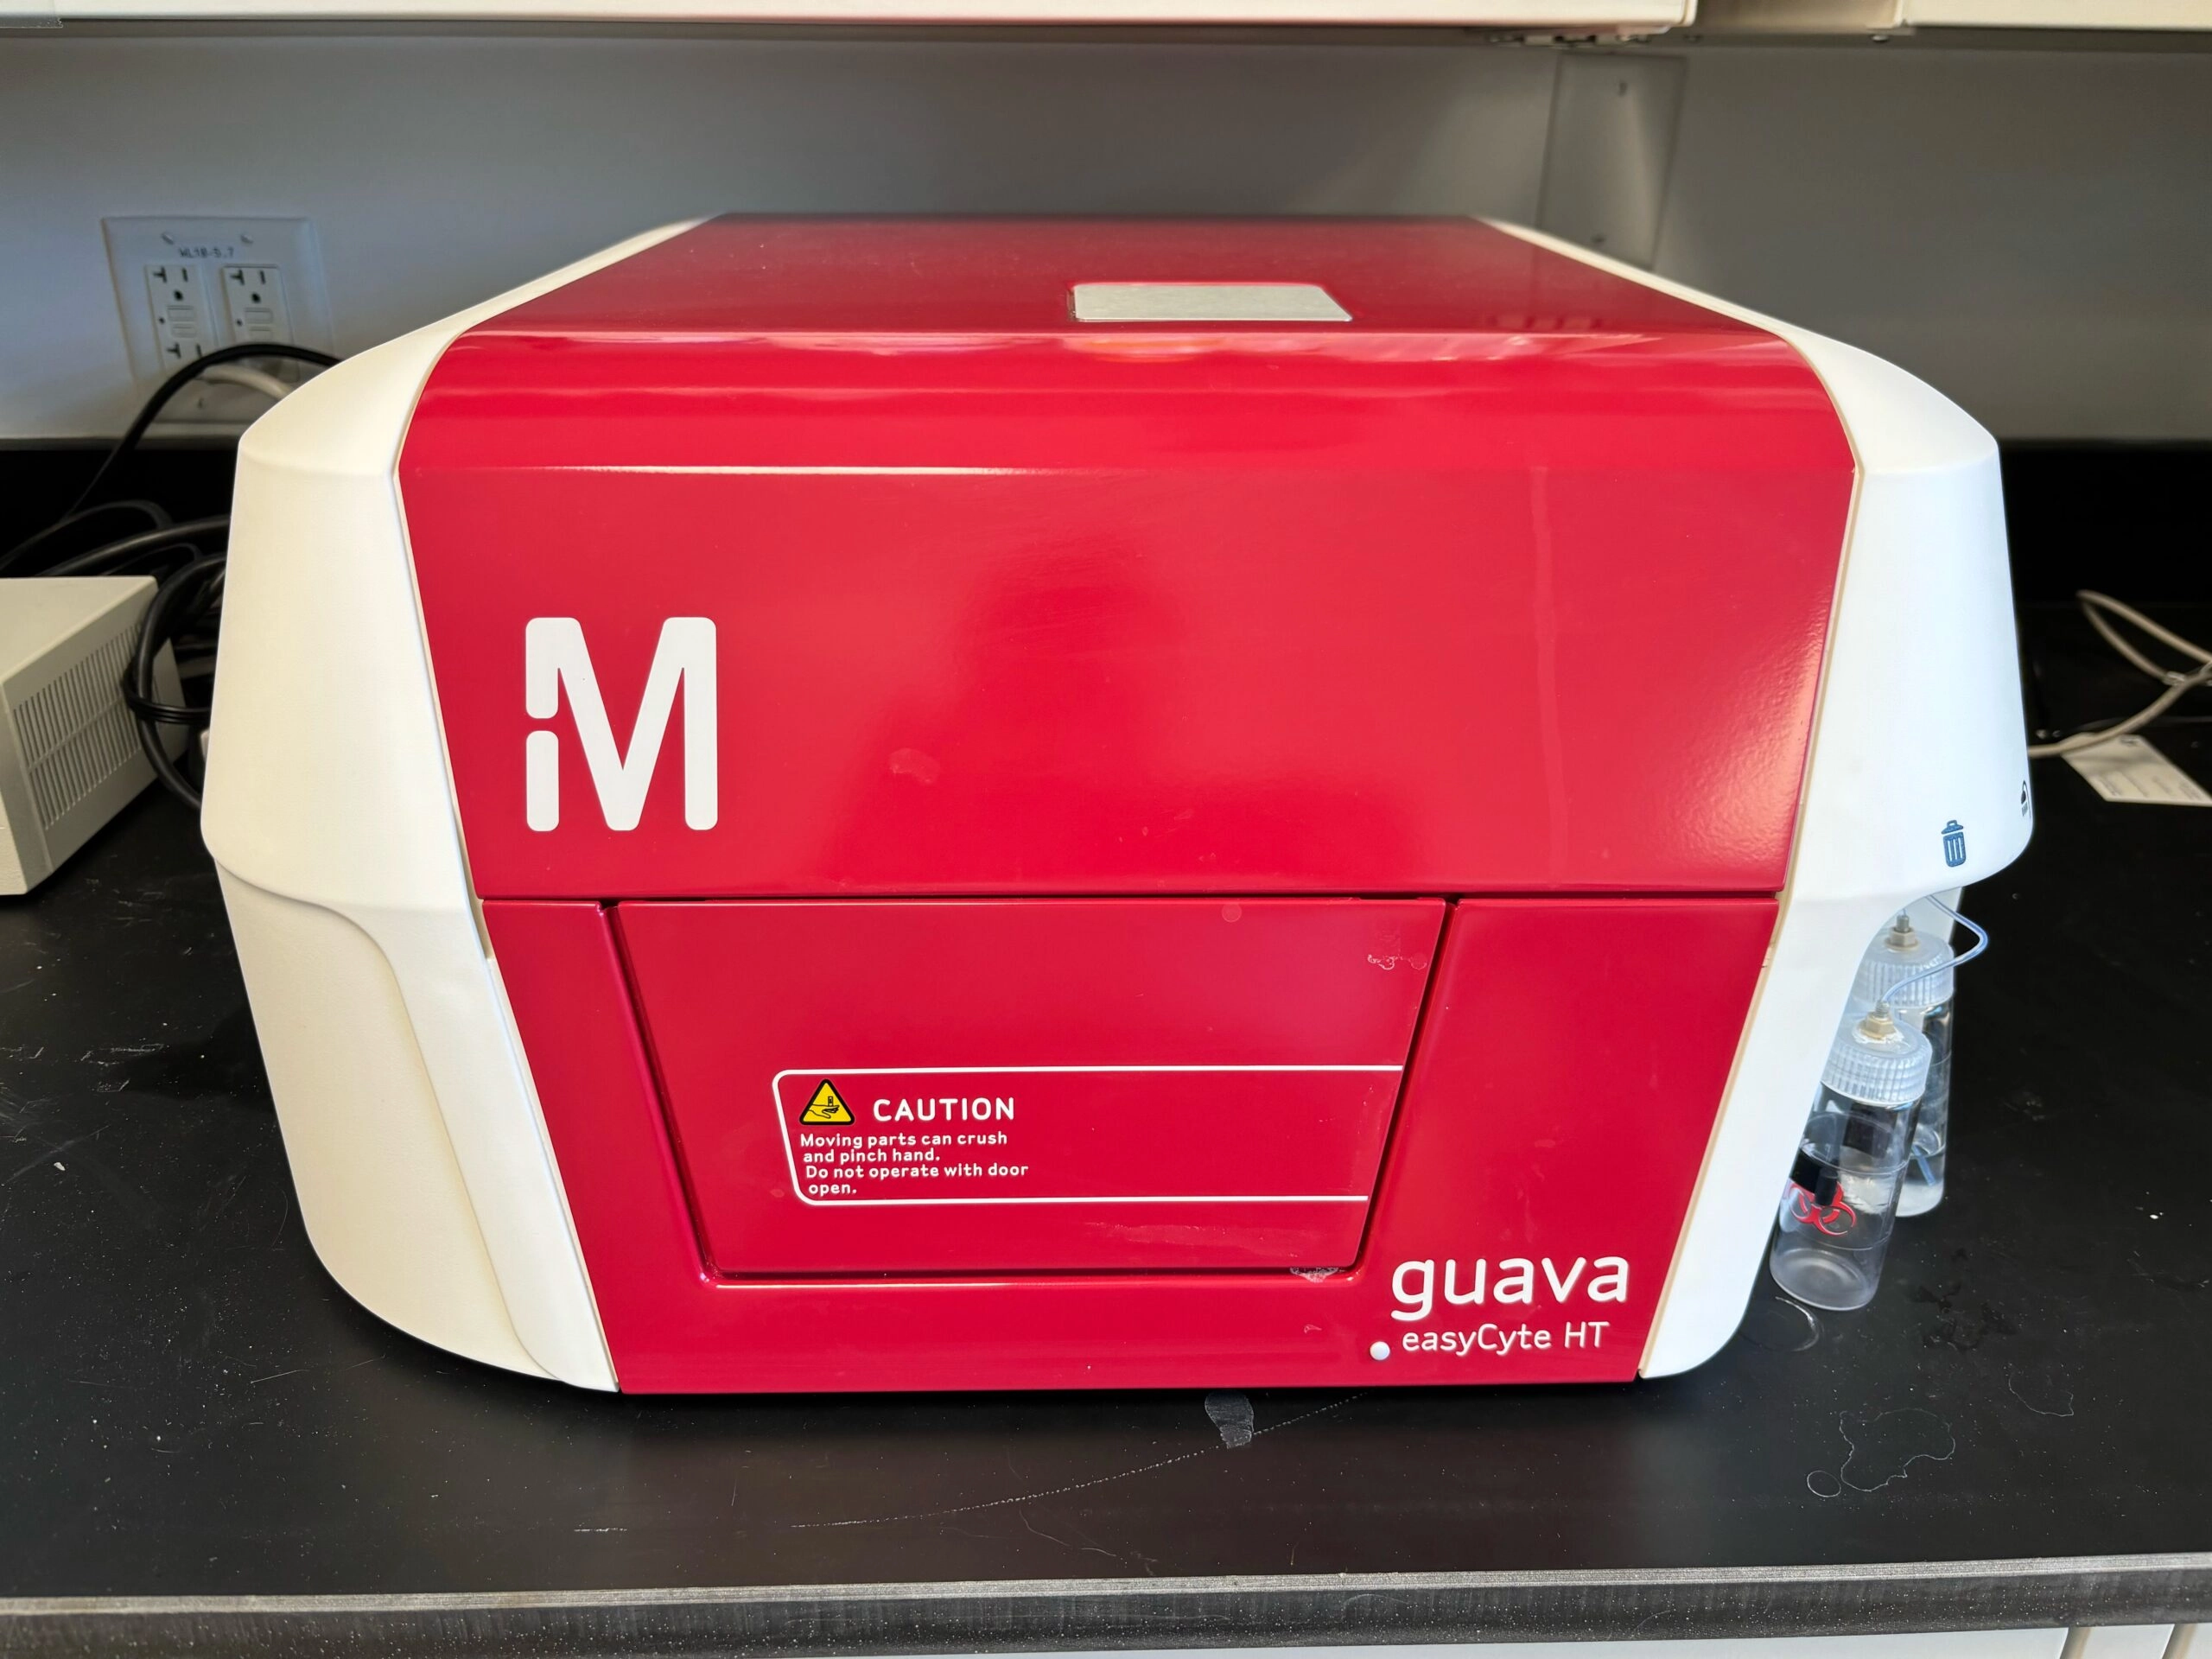 Millipore Guava EasyCyte 8HT Flow Cytometer